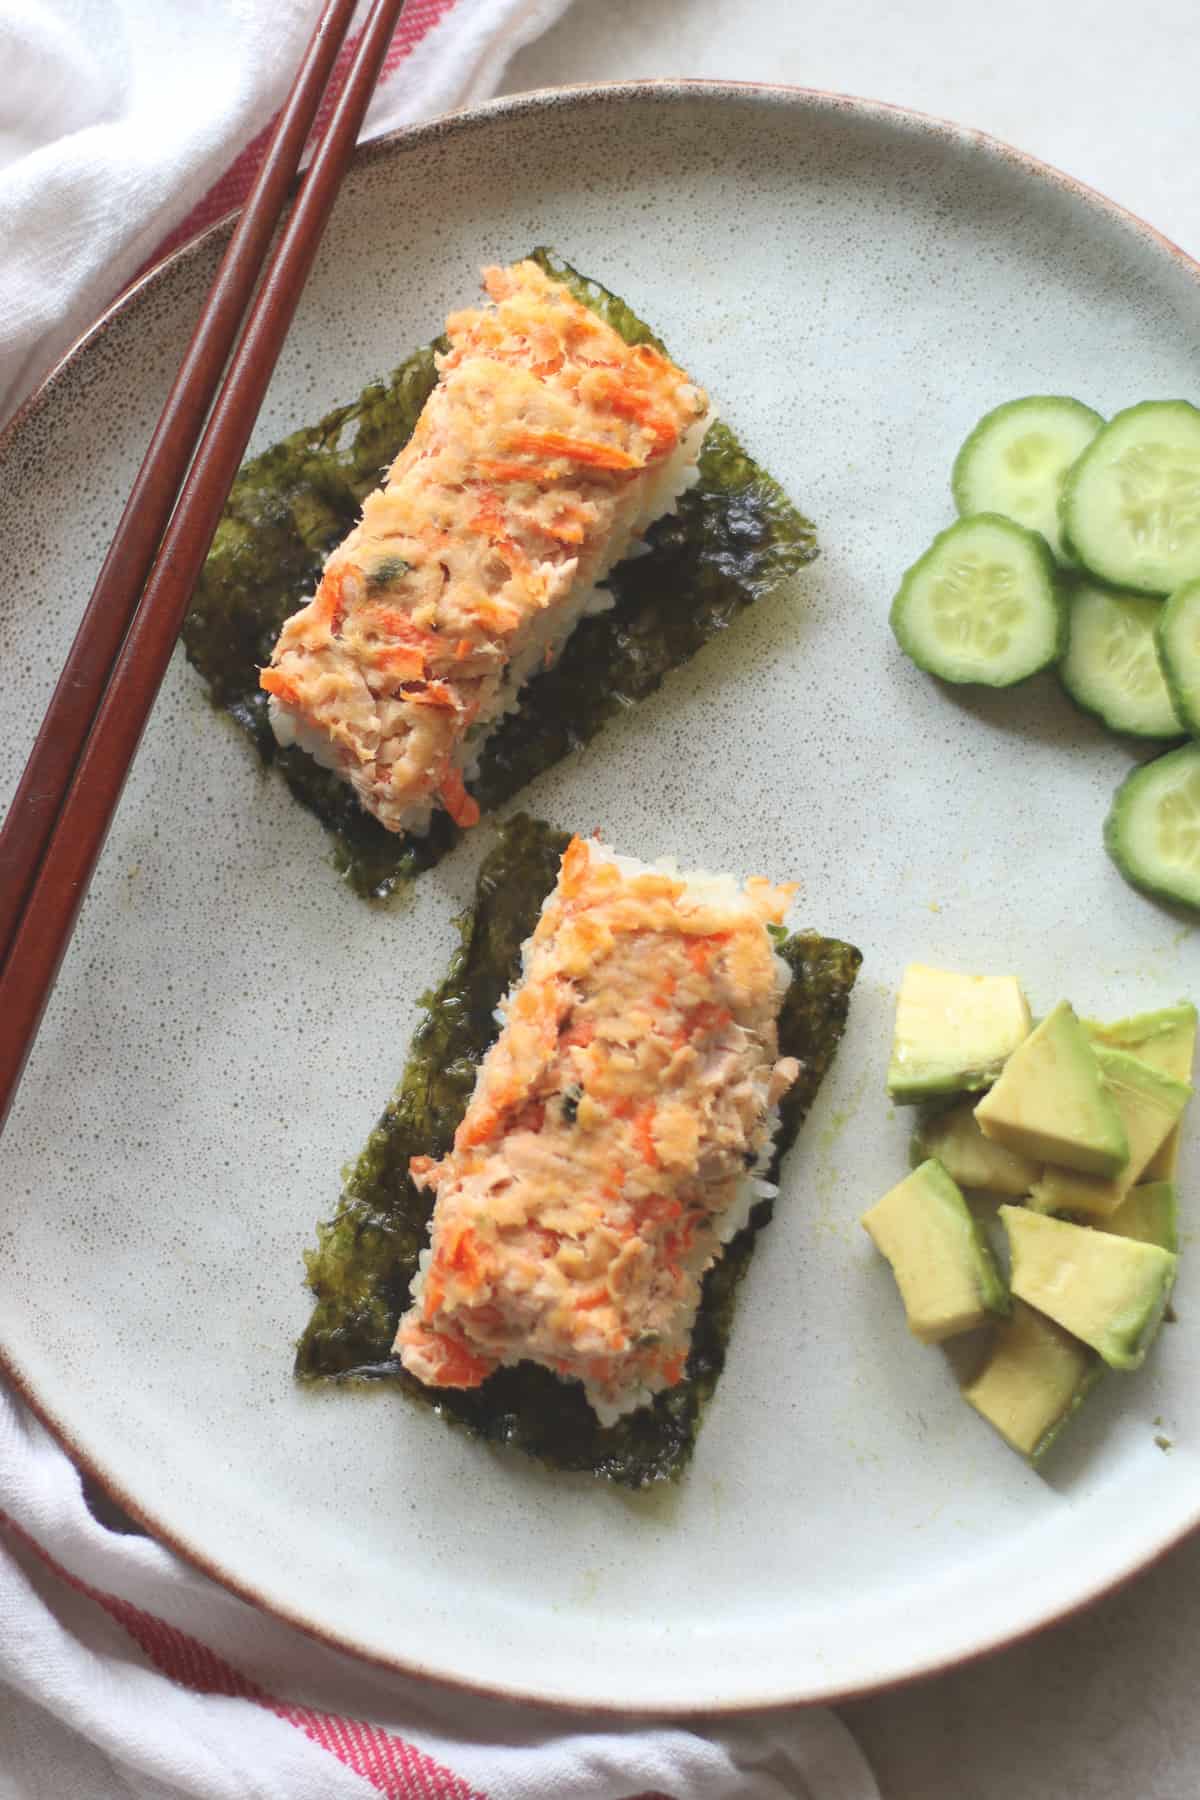 Two individually scooped sushi bake on seaweed sheet with cucumber and avocado on the side.